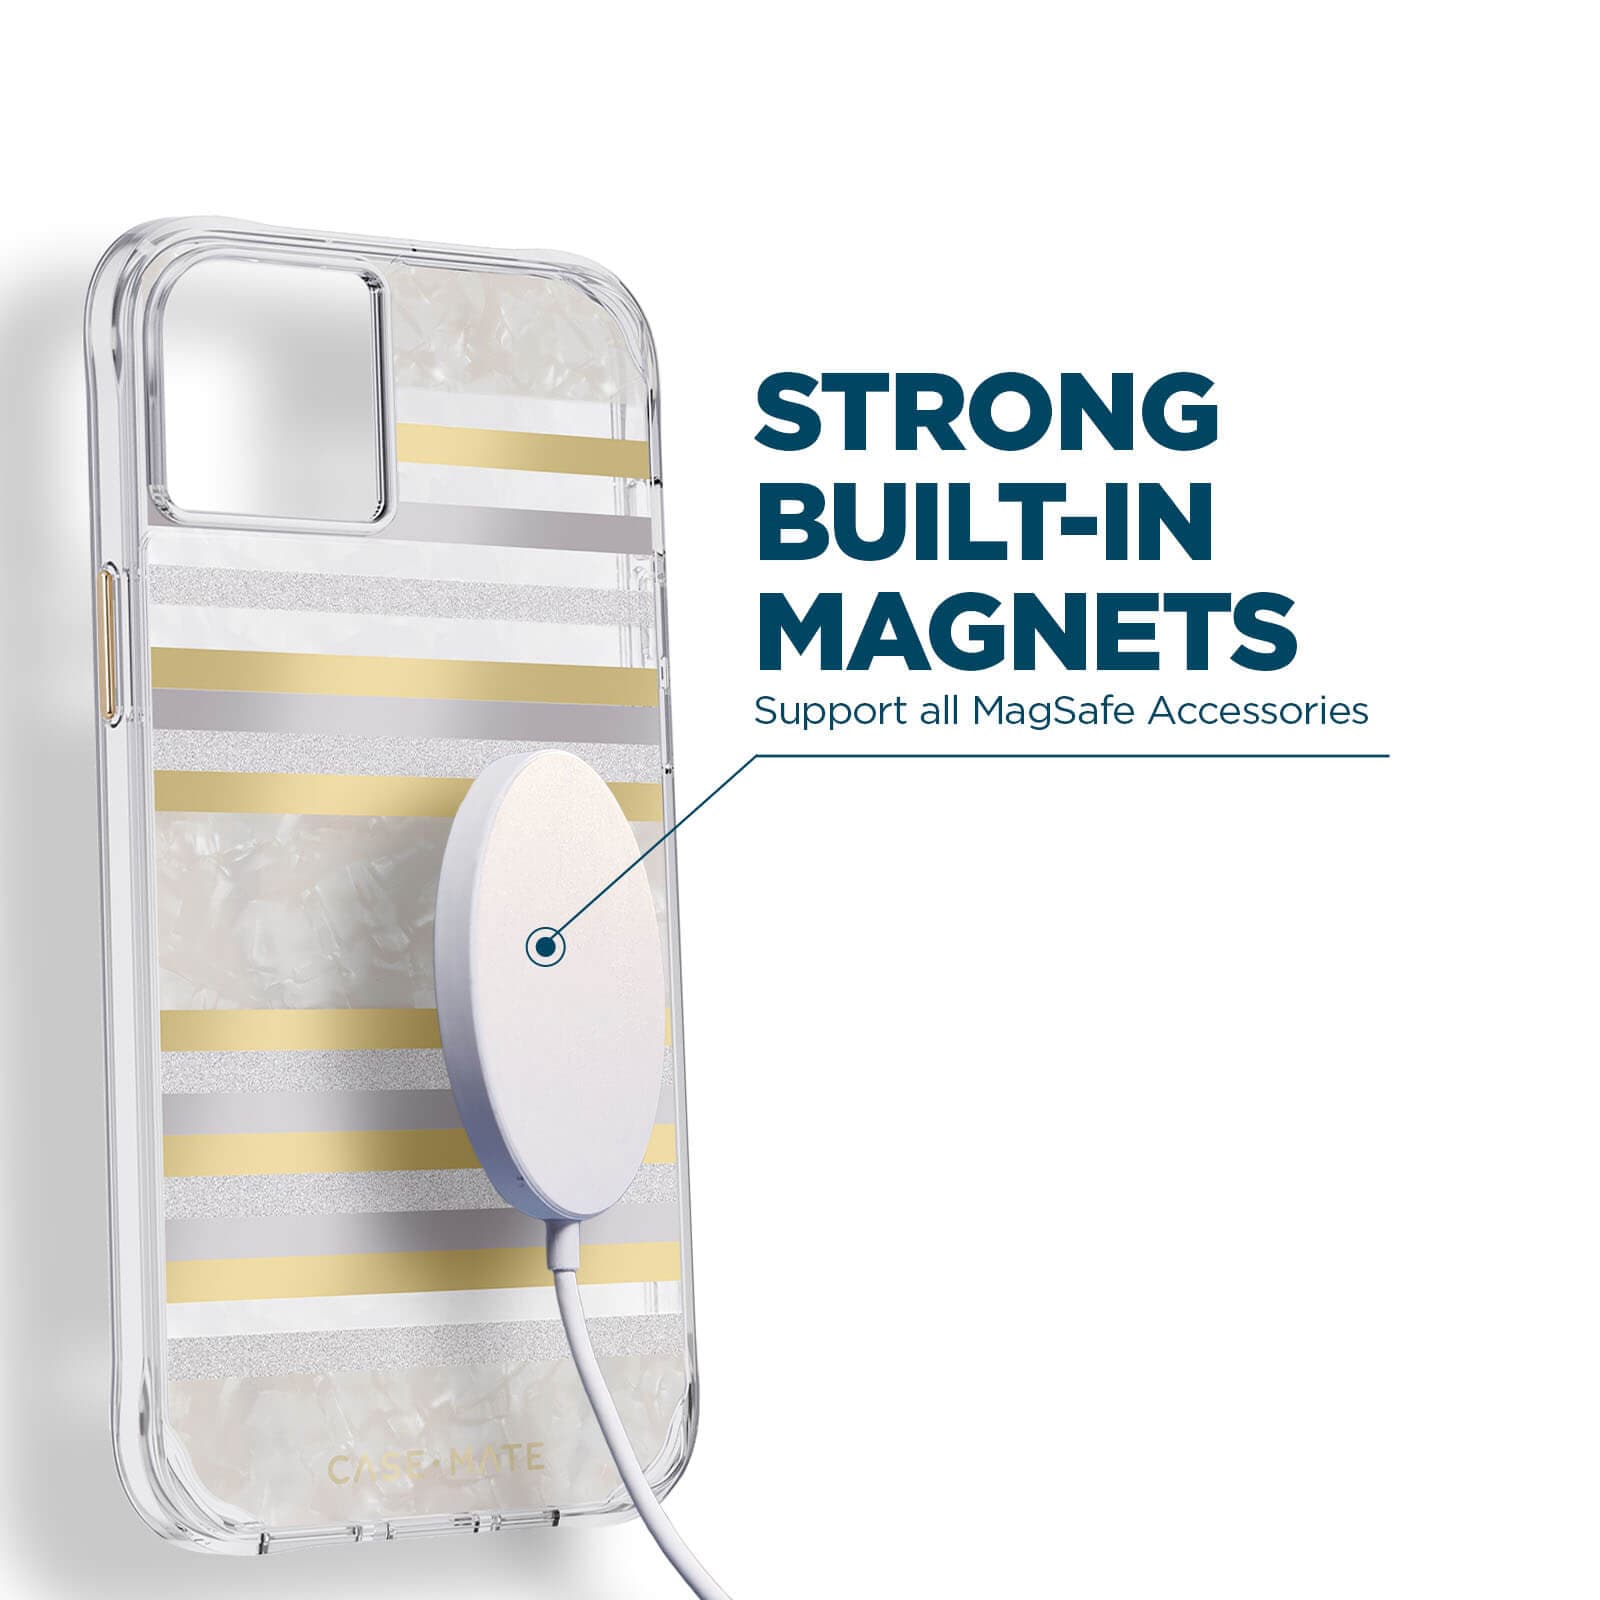 Strong built in magnets support all MagSafe accessories. color::pearl